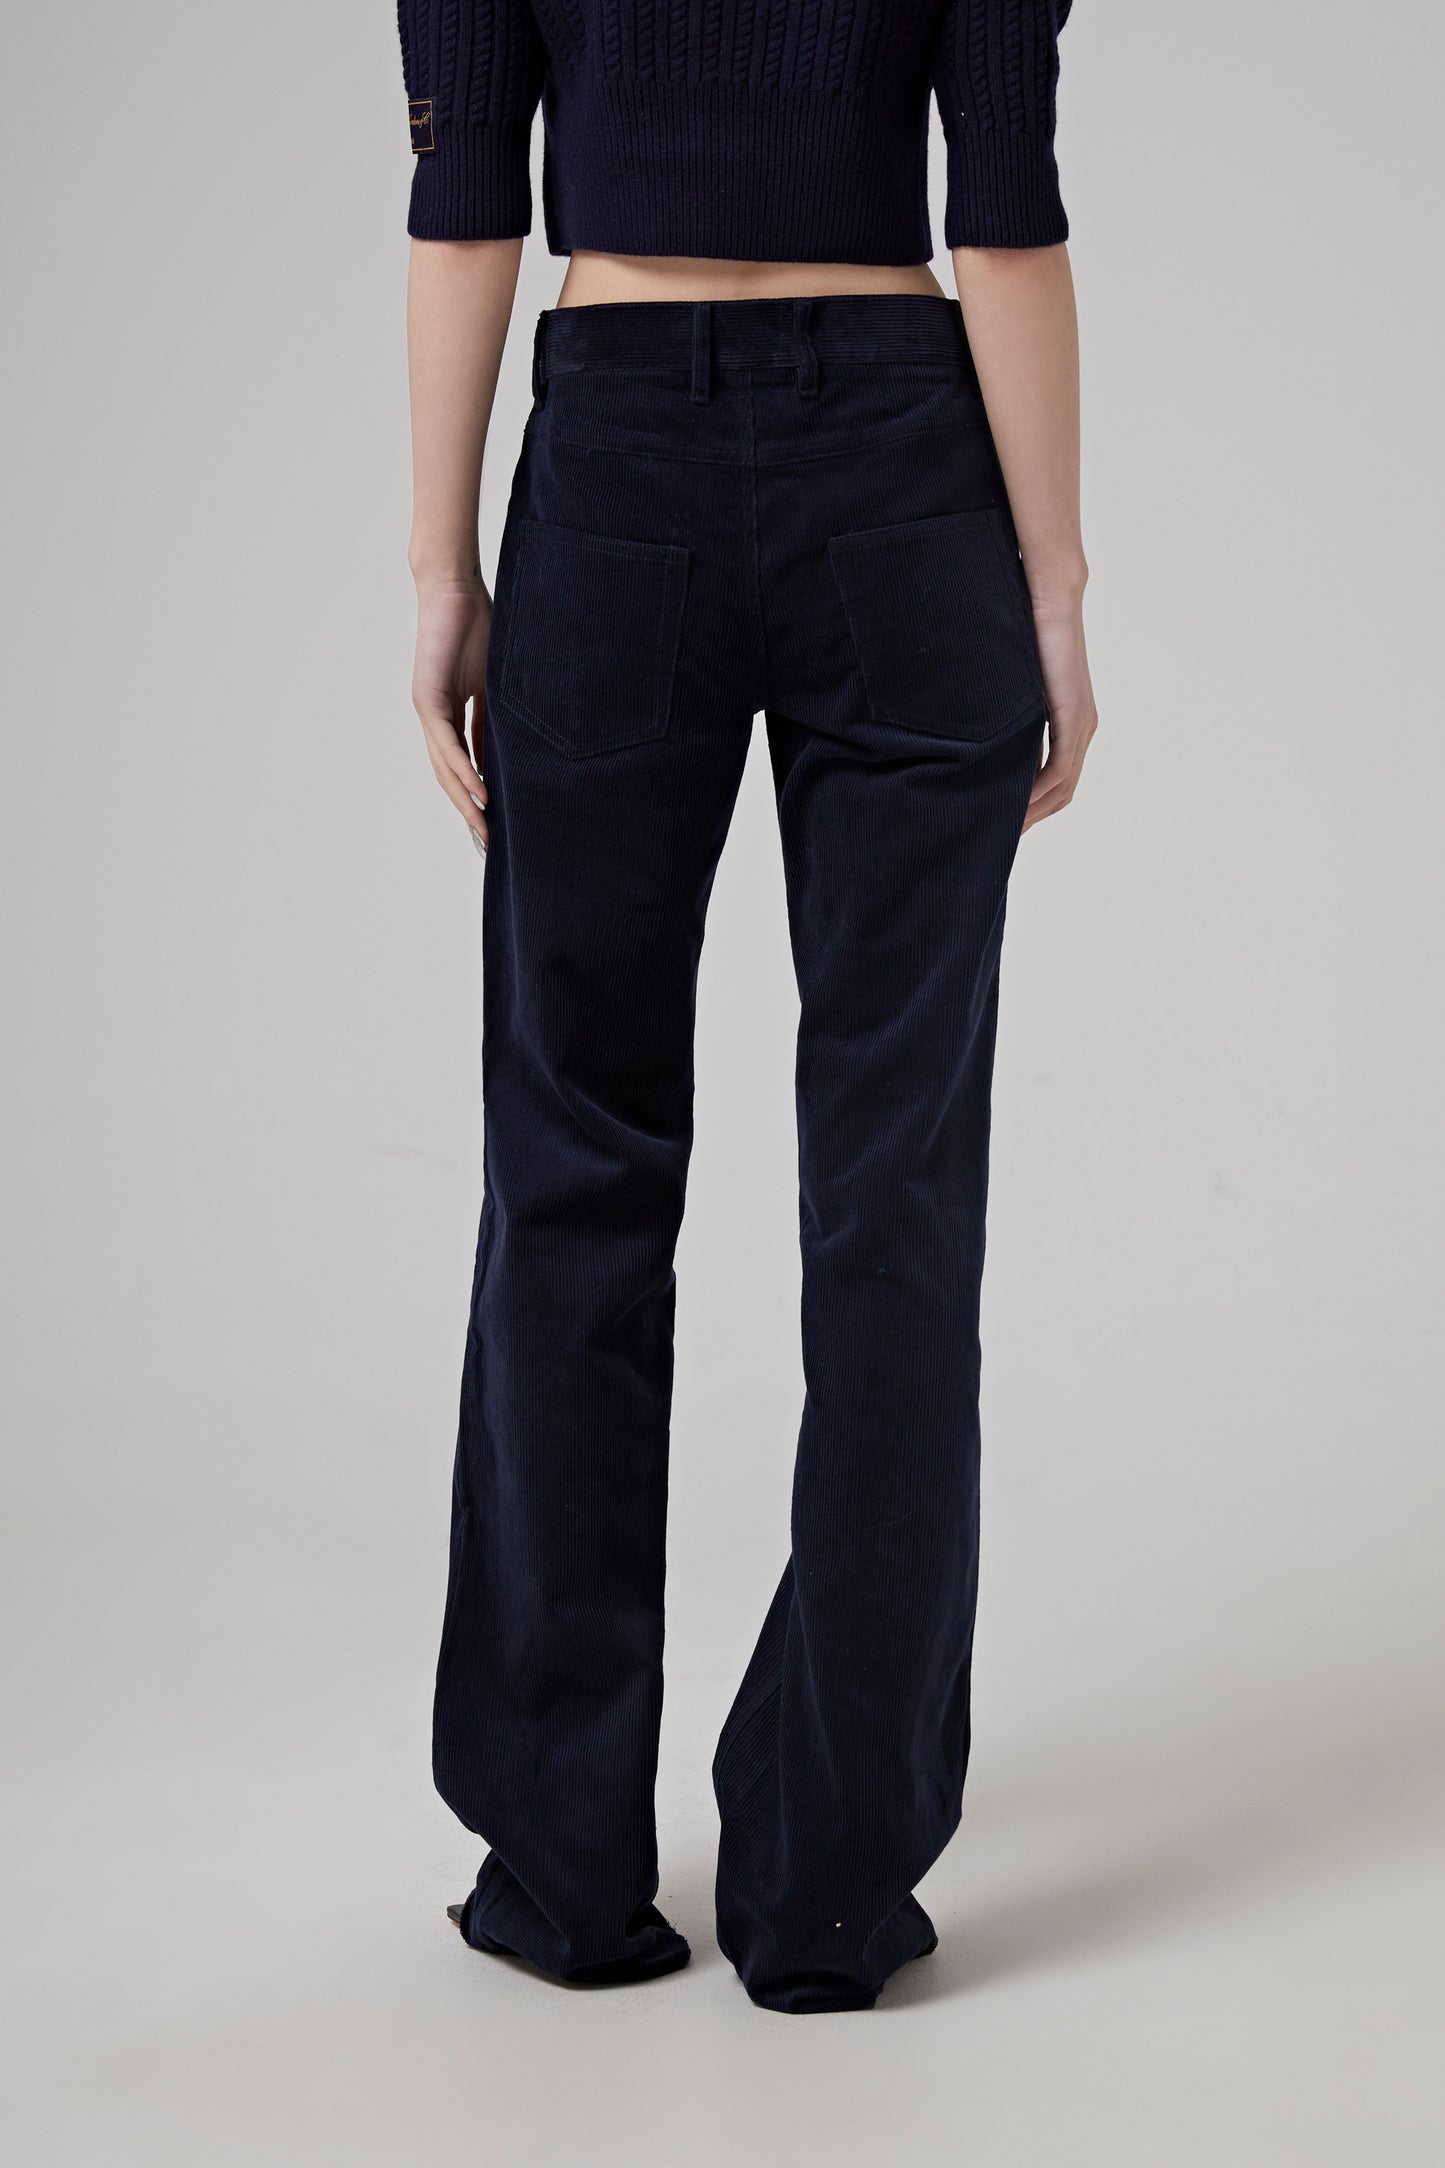 NAVY WOMENS LOW-RISE CORDUROY LOOSE FIT PANTS